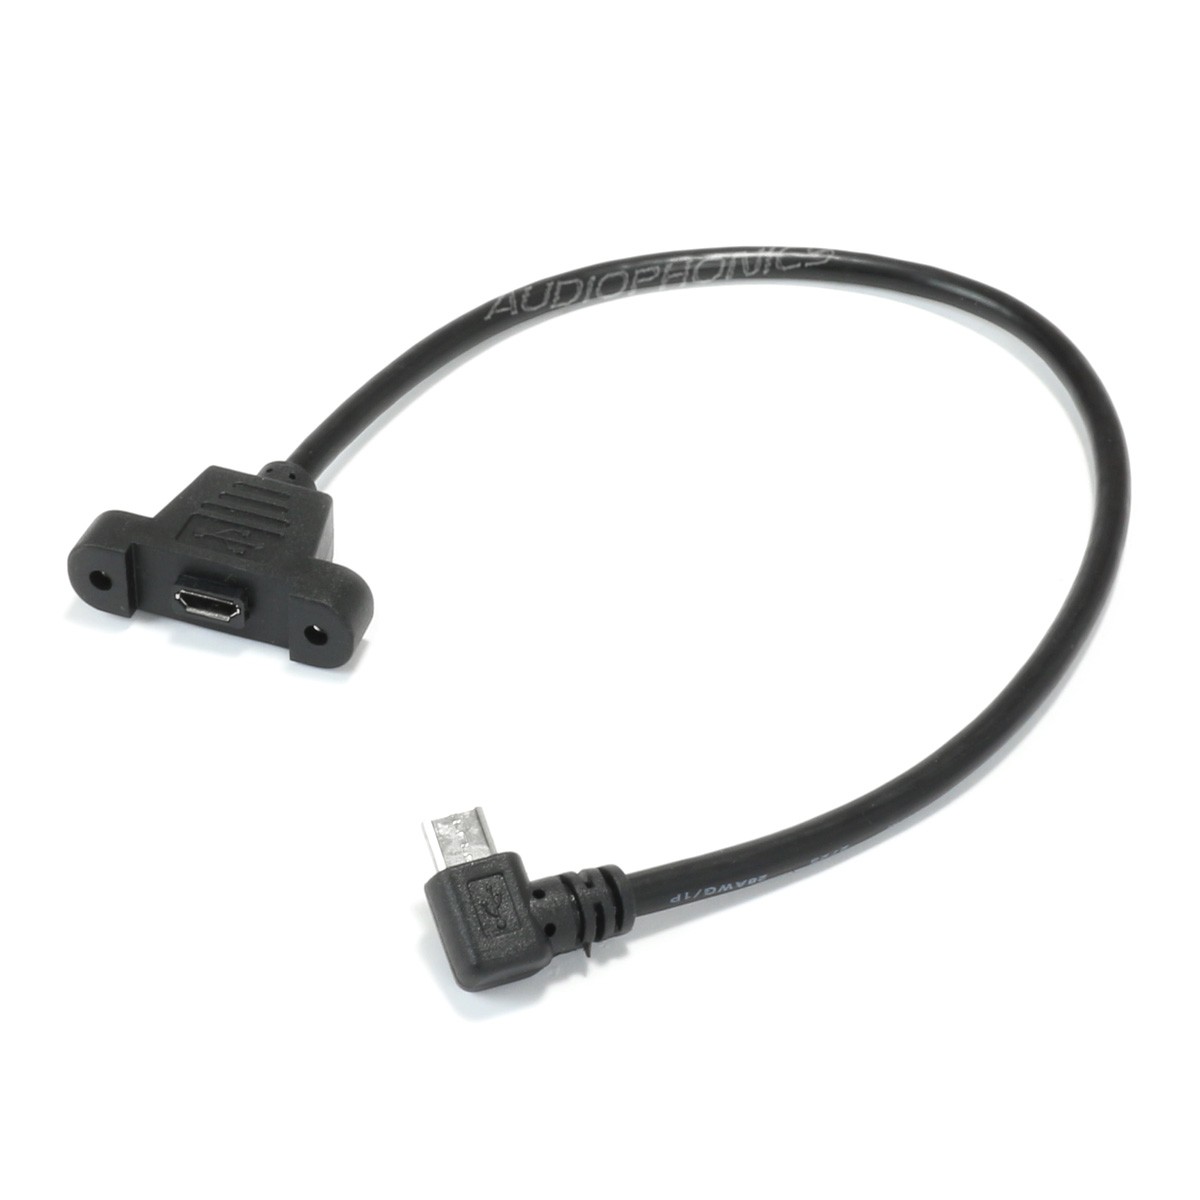 USB Cable Panel Mount Type A Female to Standard A Male Enclosure Case 